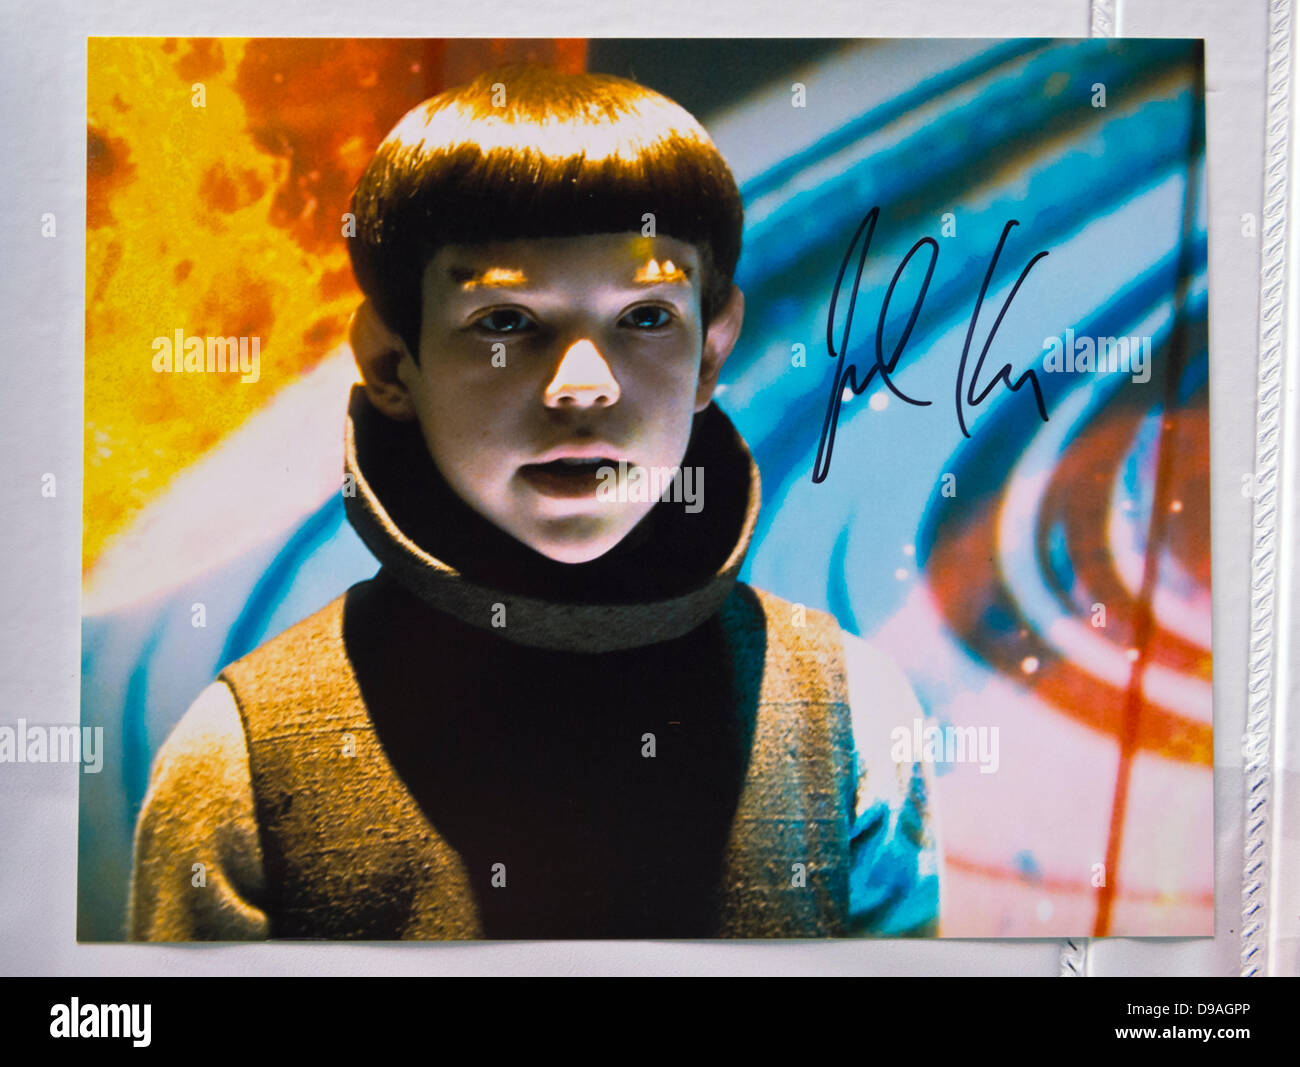 Garden City, New York. 15th June 2013. A 'Star Trek' 2009 film still,  autographed by child actor Jacob Kogan who portrayed Young Spock, is one of  many collectibles for sale at Eternal